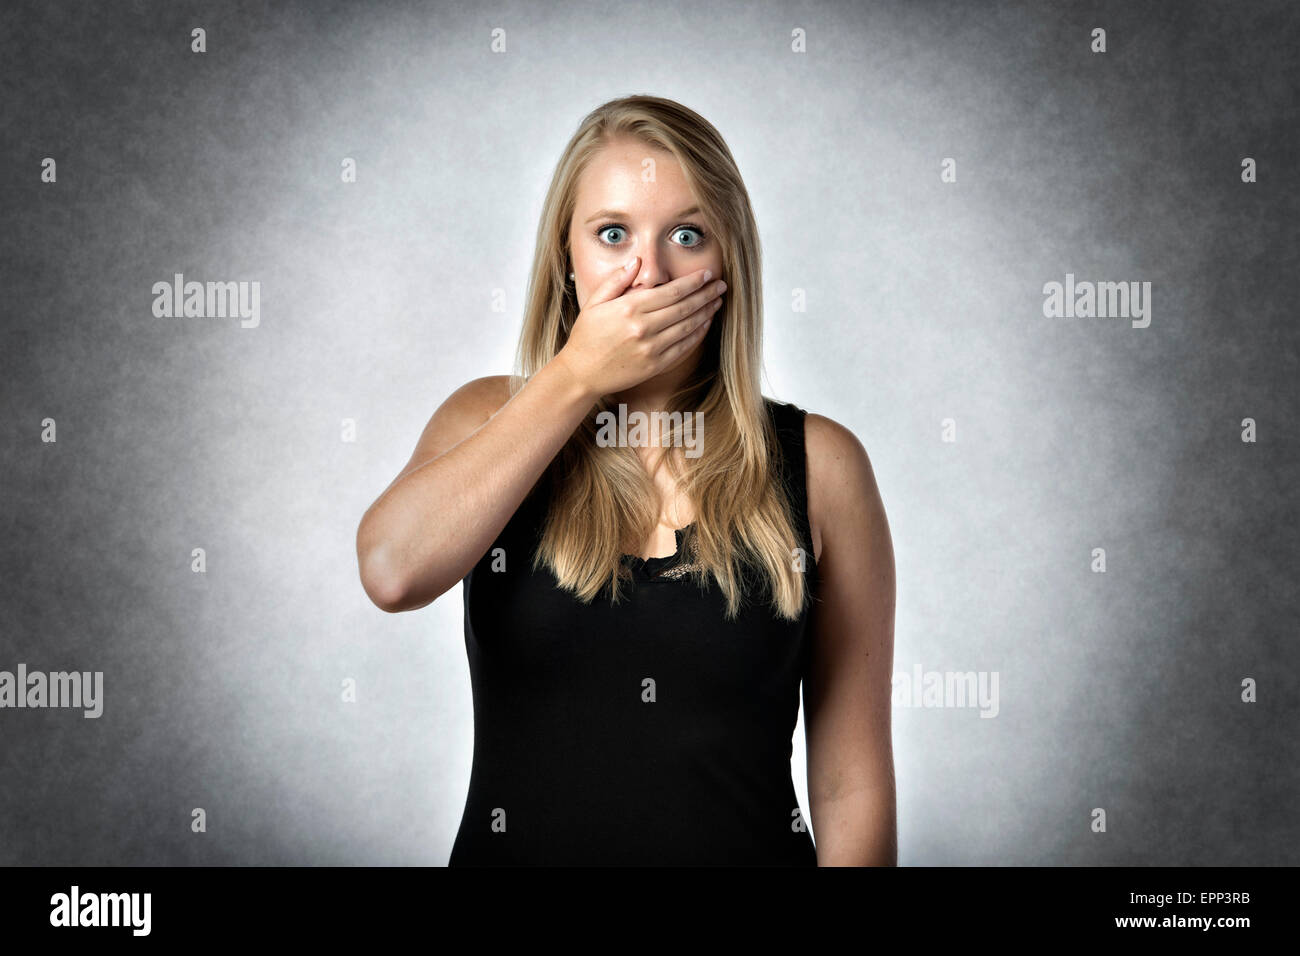 Blonde shocked woman holding anxiously the hand over mouth Stock Photo